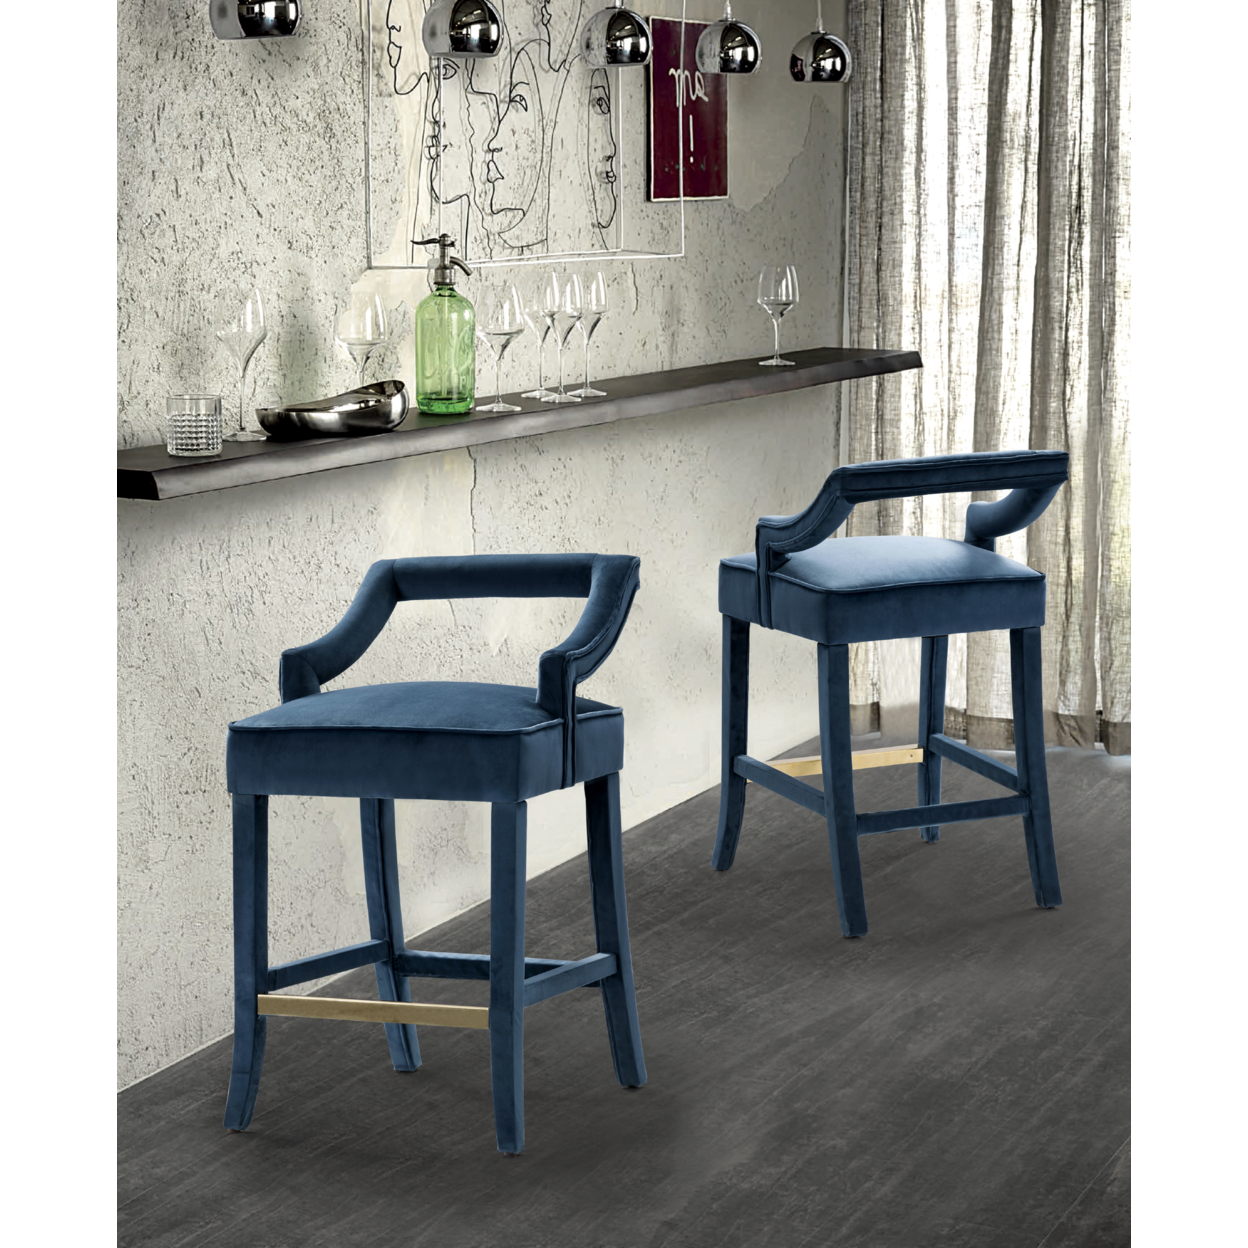 Iconic Home Catalina Counter Stool Chair Velvet Upholstered Half Back Design Gold Tone Footrest Bar Wood Frame, Modern Contemporary - Teal